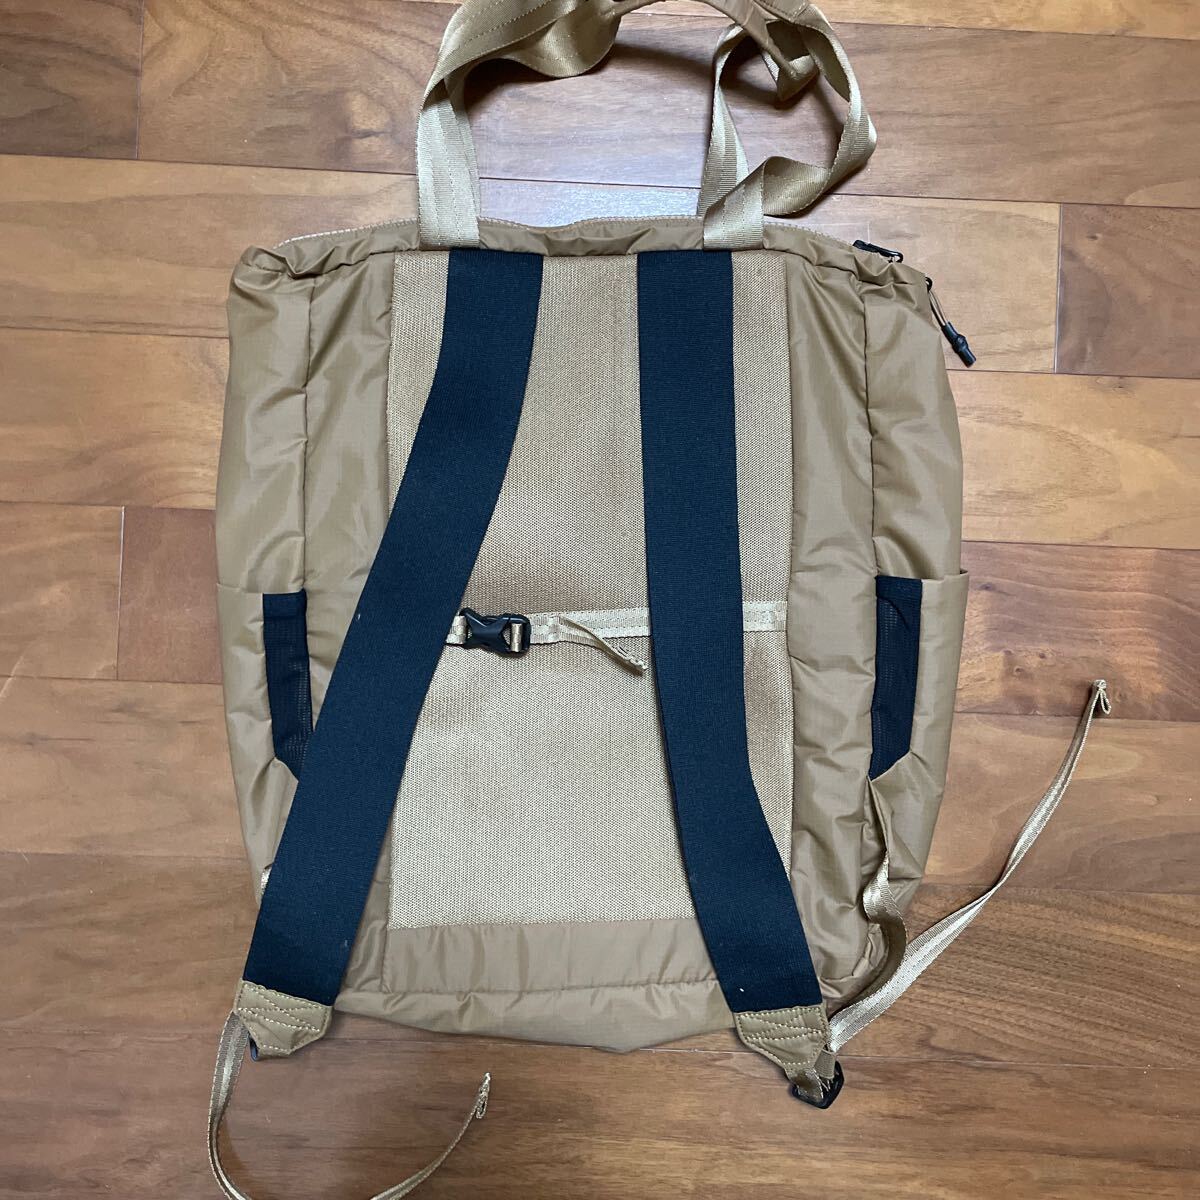 NORTH FACE GLAM TOTE 18L 2wayバックパック の画像2